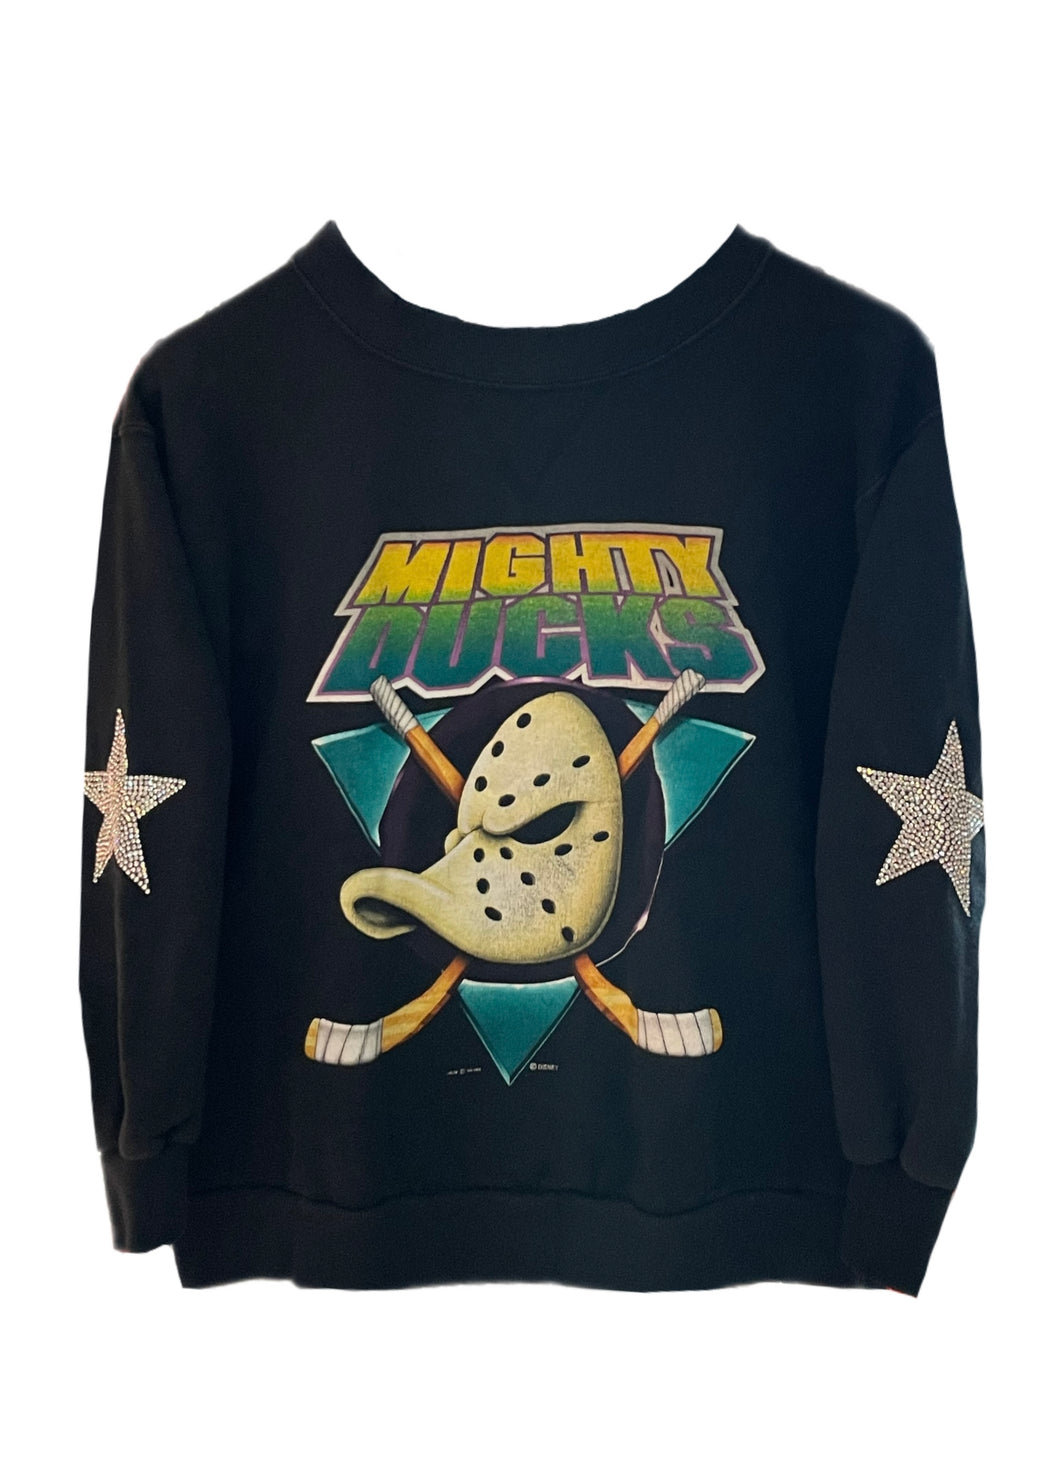 Anaheim Ducks, NHL One of a KIND Vintage “Mighty Ducks” Sweatshirt with Crystal Star Design - Size: Youth L/Adult XS/S